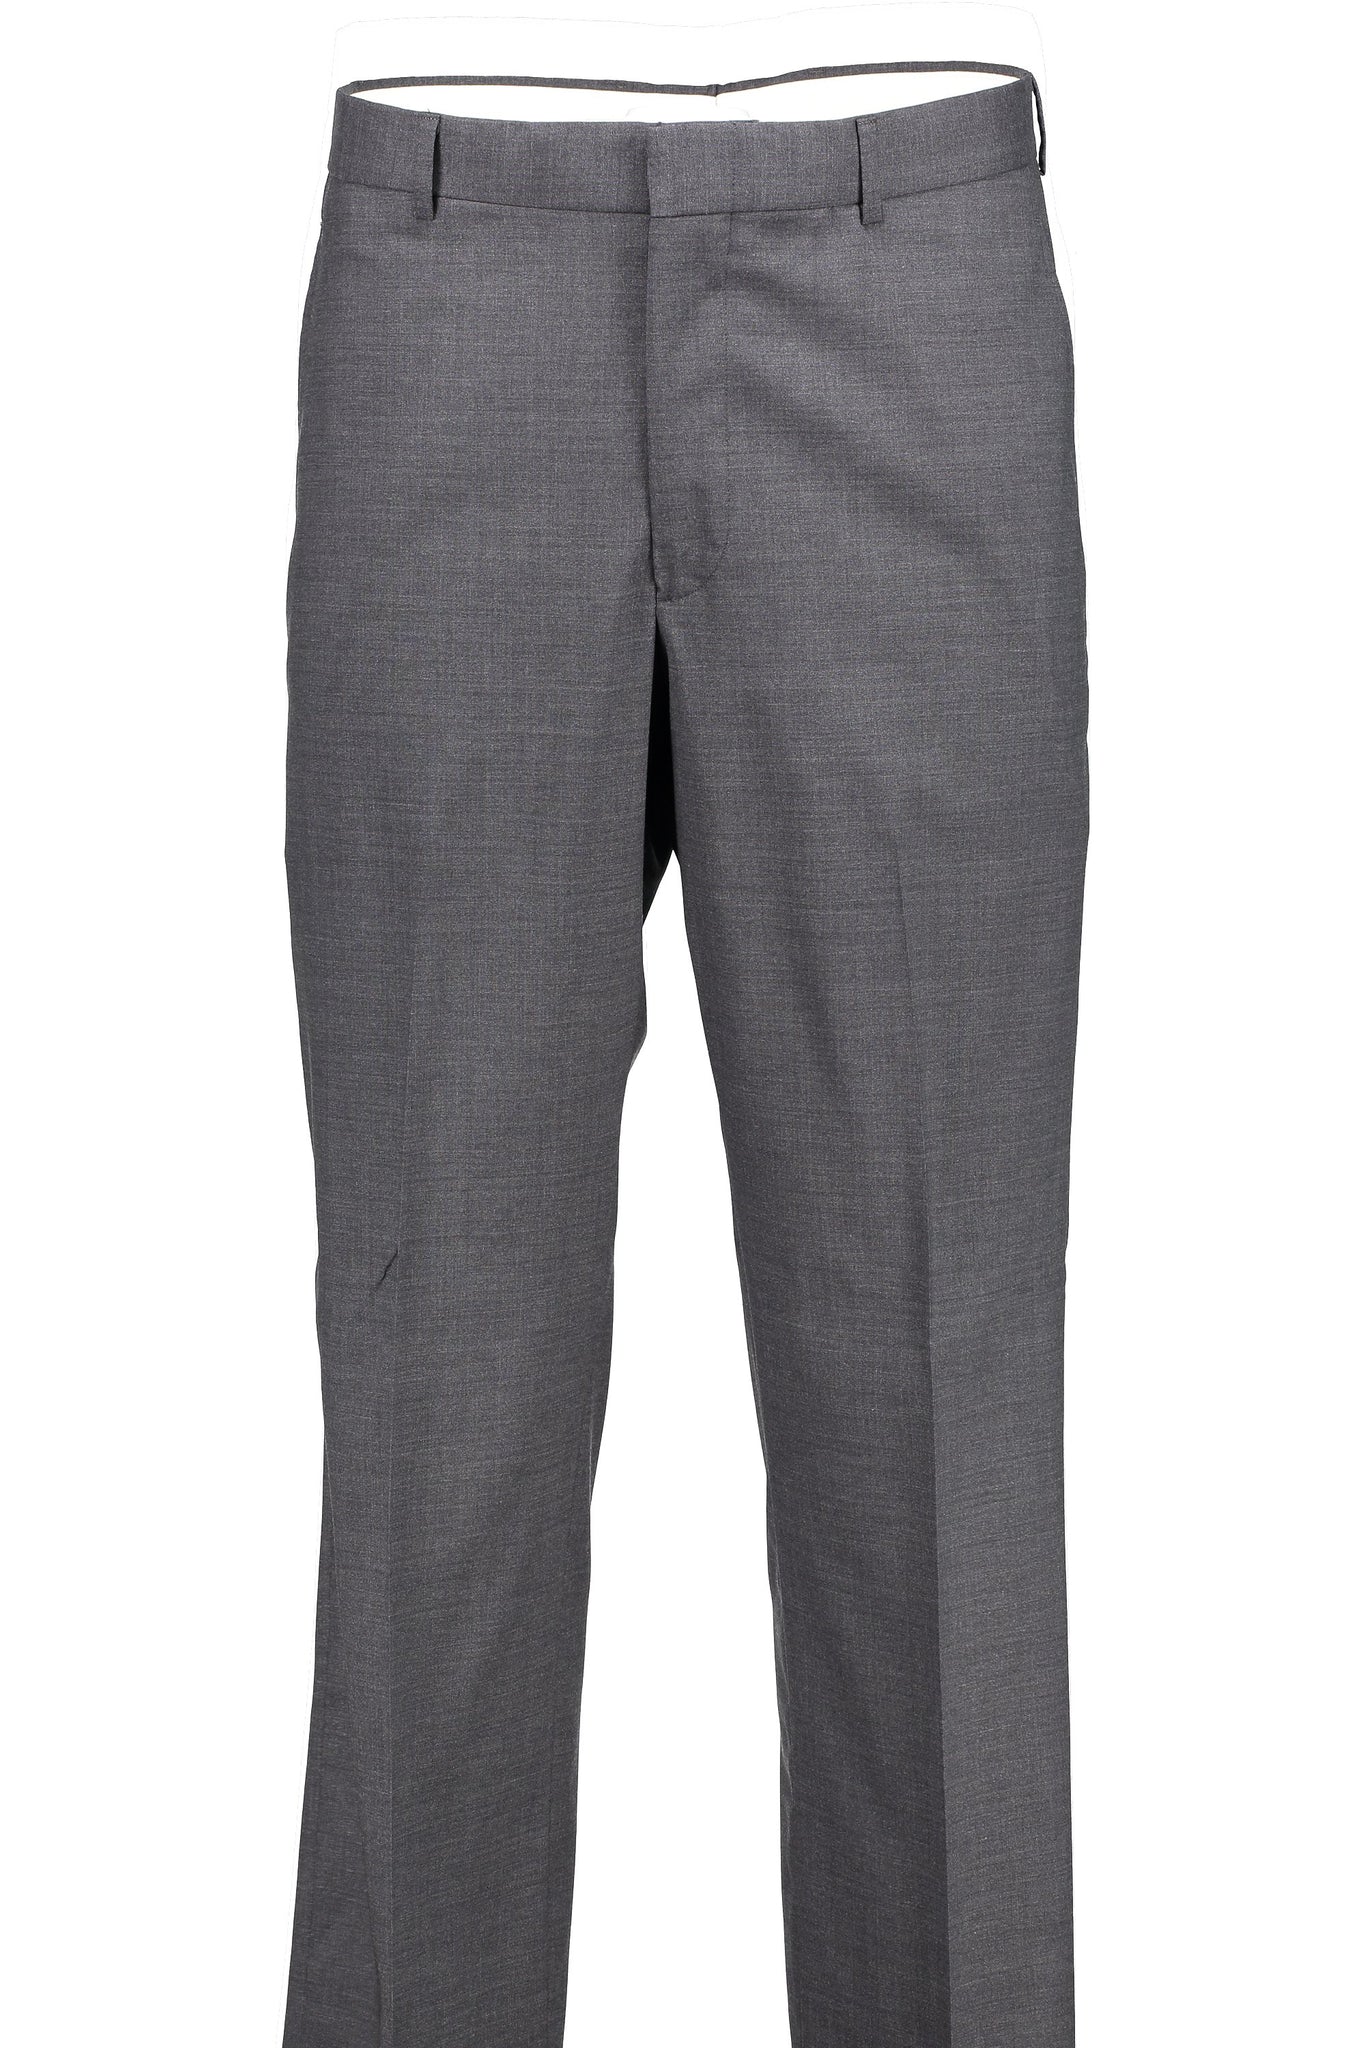 M&S MARKS & SPENCER Mens Nova Fides Gray Wool Tailored Pants Flat Front 34  X 30